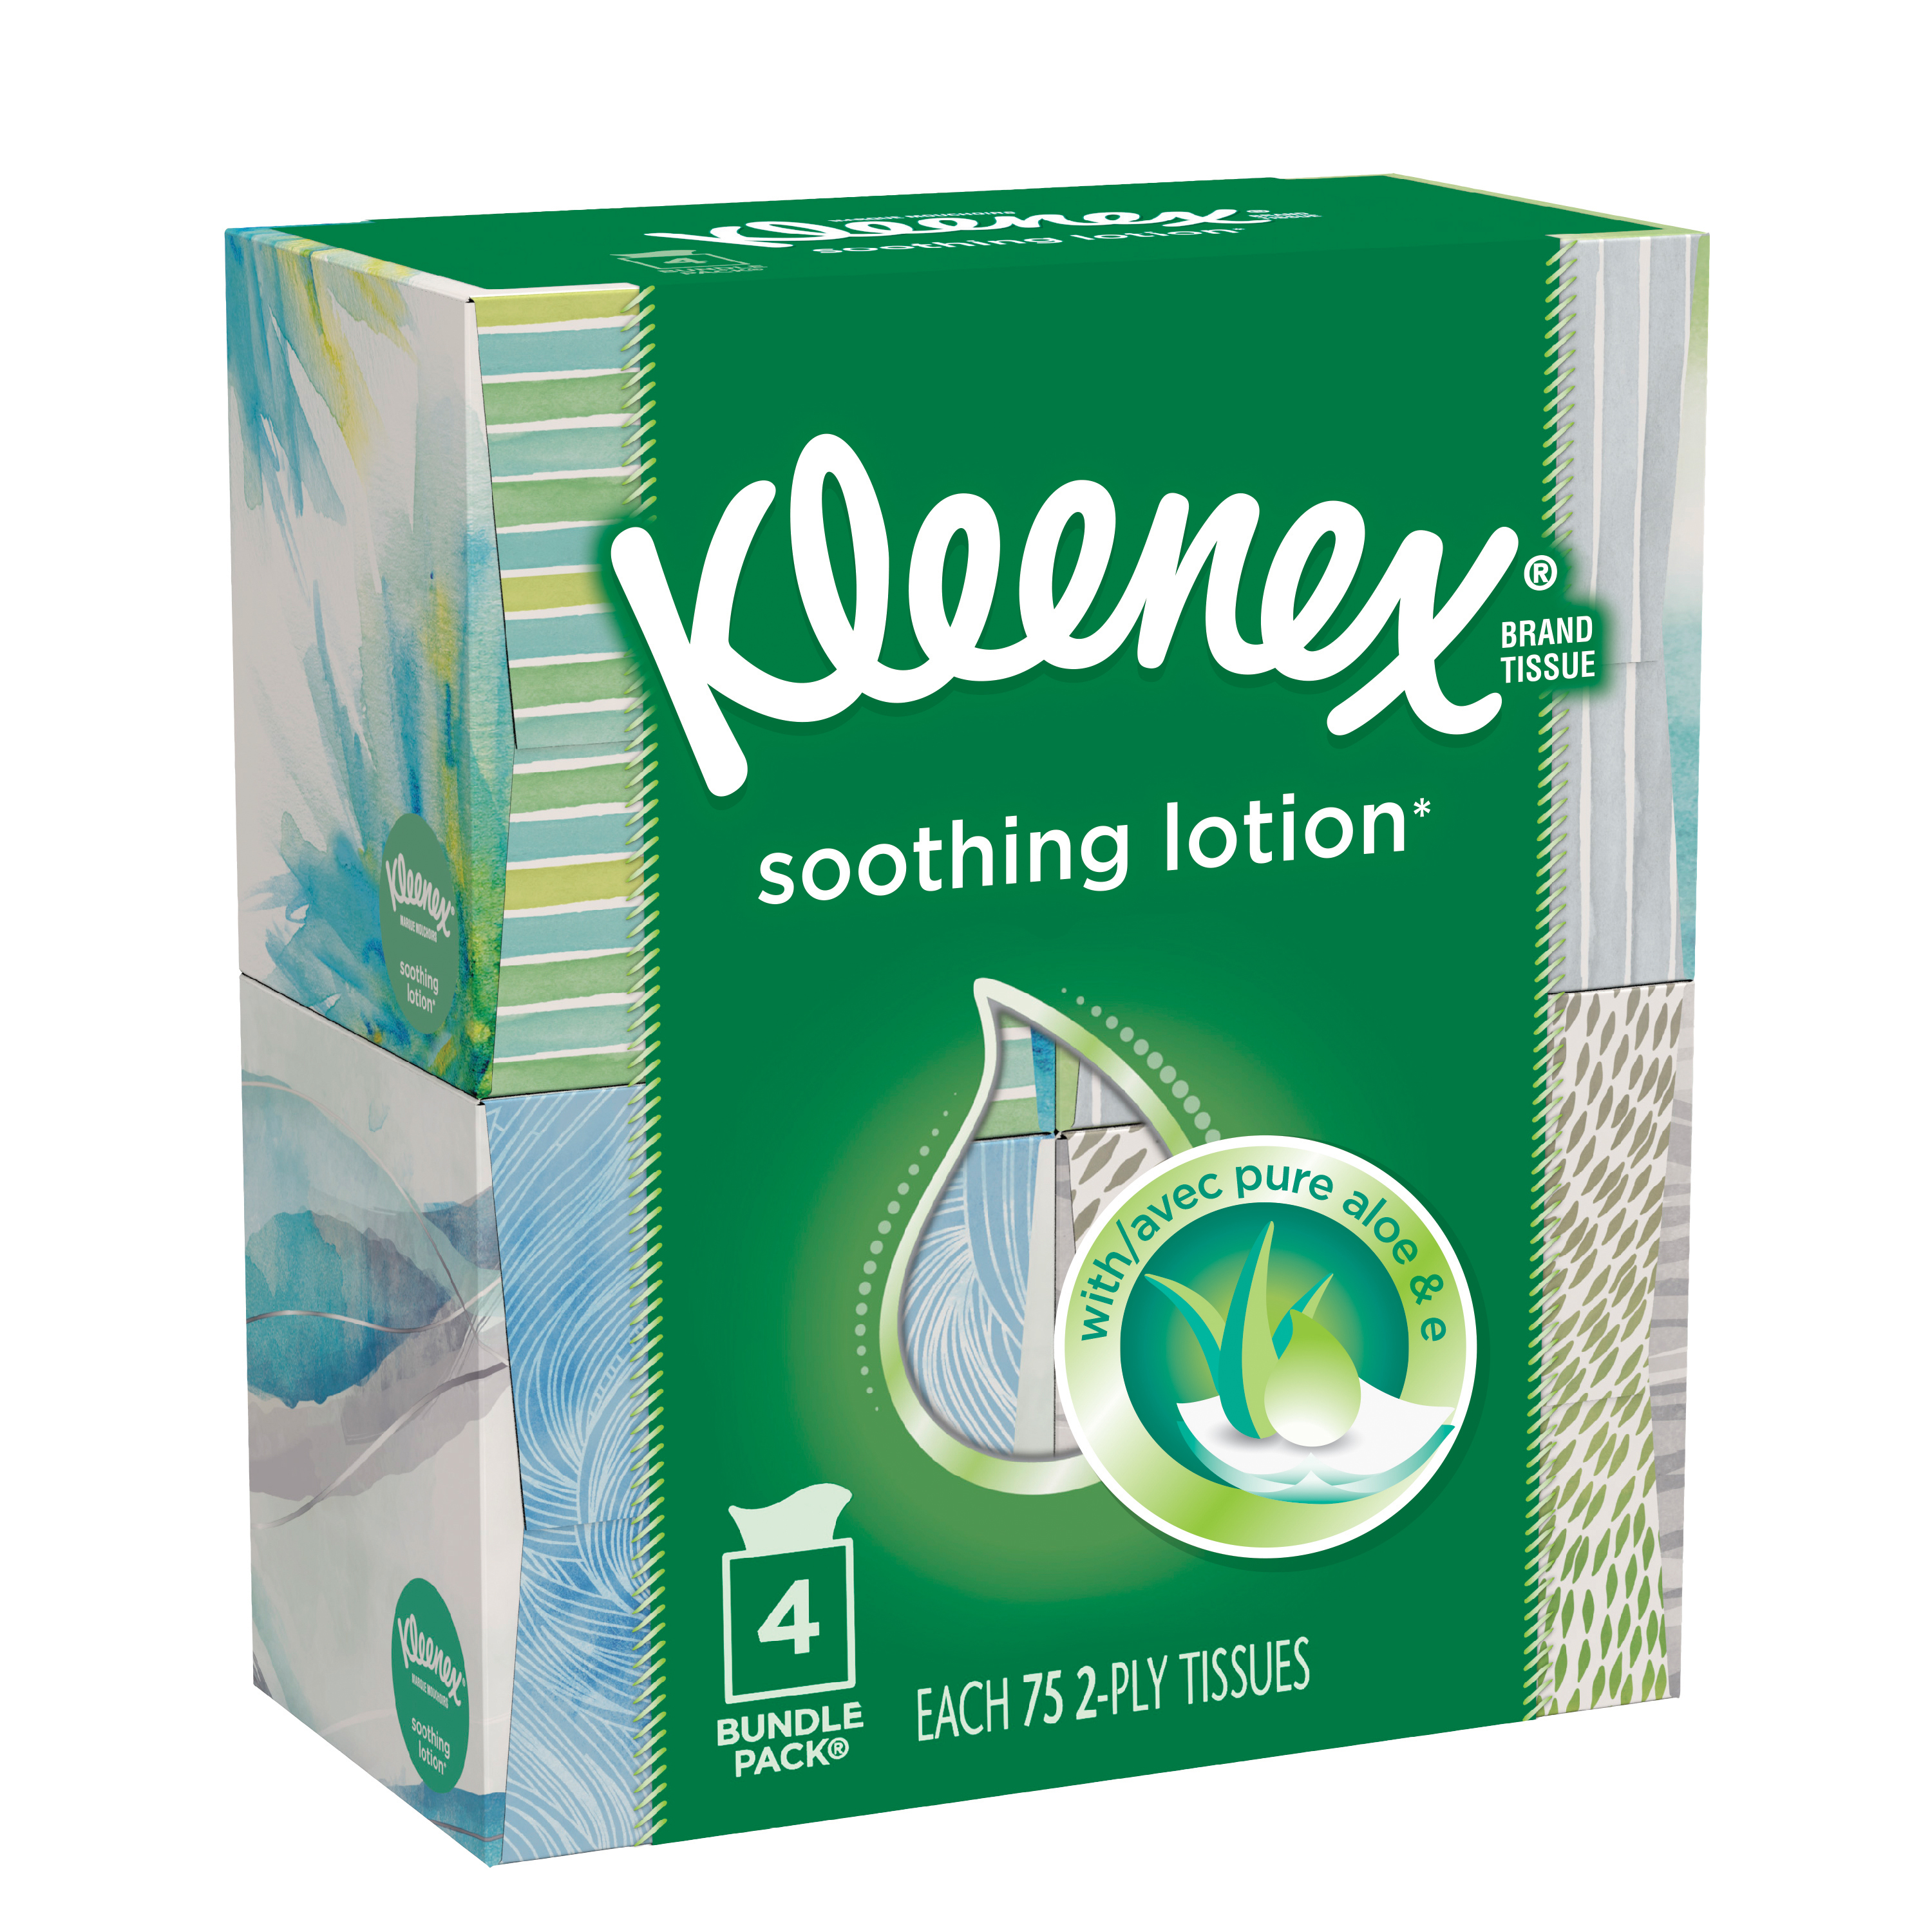 Kleenex Soothing Lotion Facial Tissues, 4 Cube Boxes, 75 White Tissues per Box, 3-Ply (300 Total Tissues) - image 4 of 4